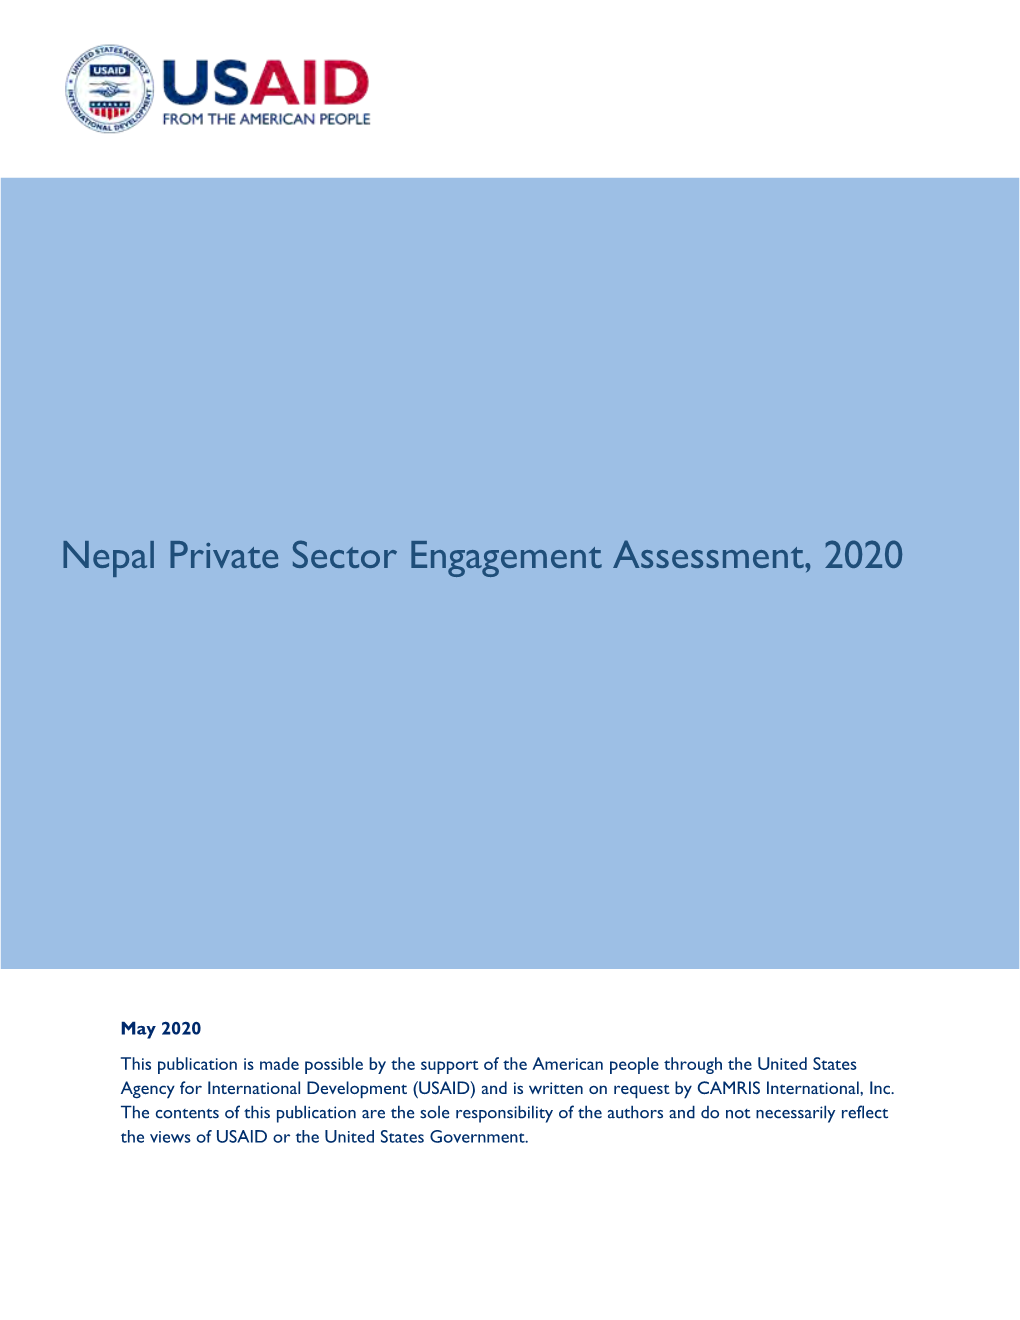 Nepal Private Sector Engagement Assessment, 2020